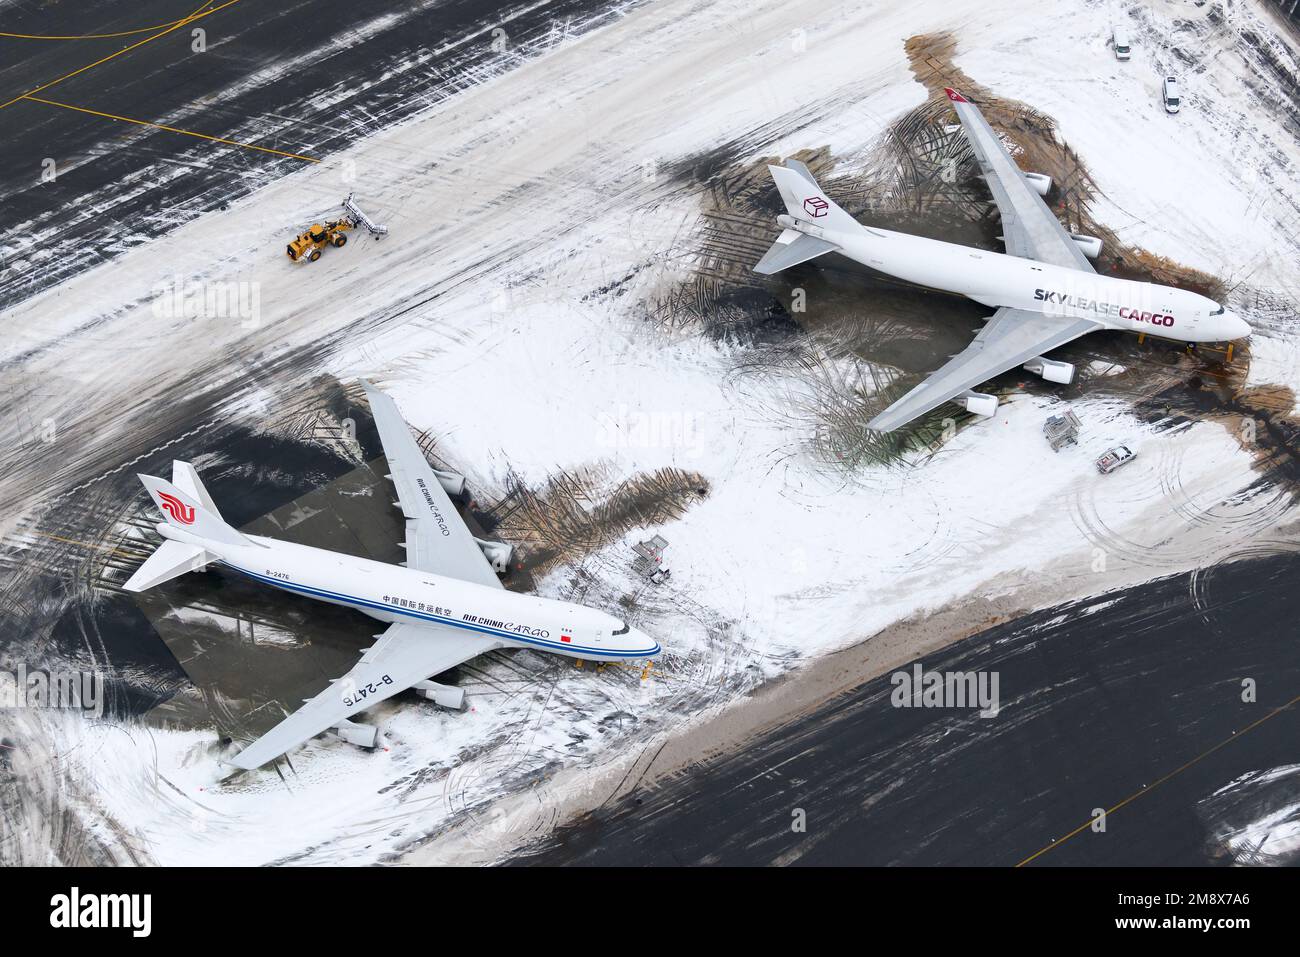 Anchorage Airport after snow storm with two Boeing 747 cargo aircraft. Air China Cargo and Sky Lease Cargo 747F airplane in snow airport operations. Stock Photo